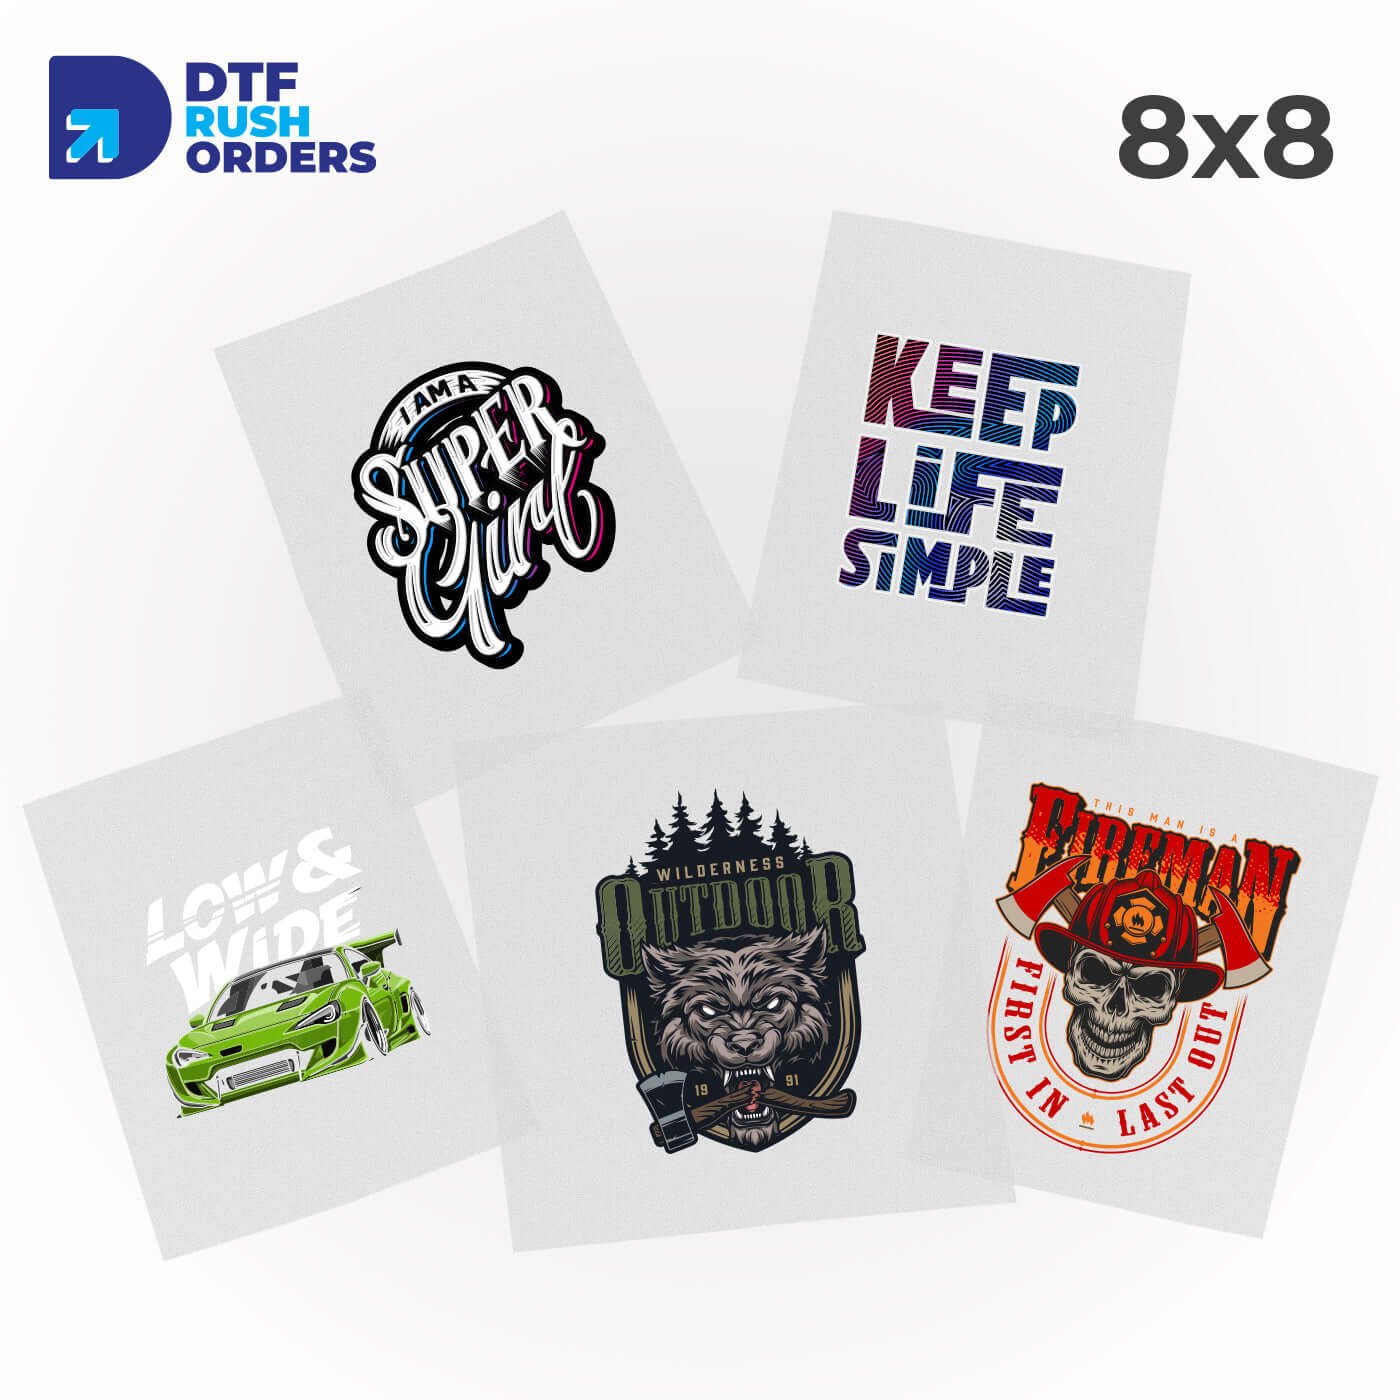 Bulk 8x8 DTF Transfers ready for diverse printing projects